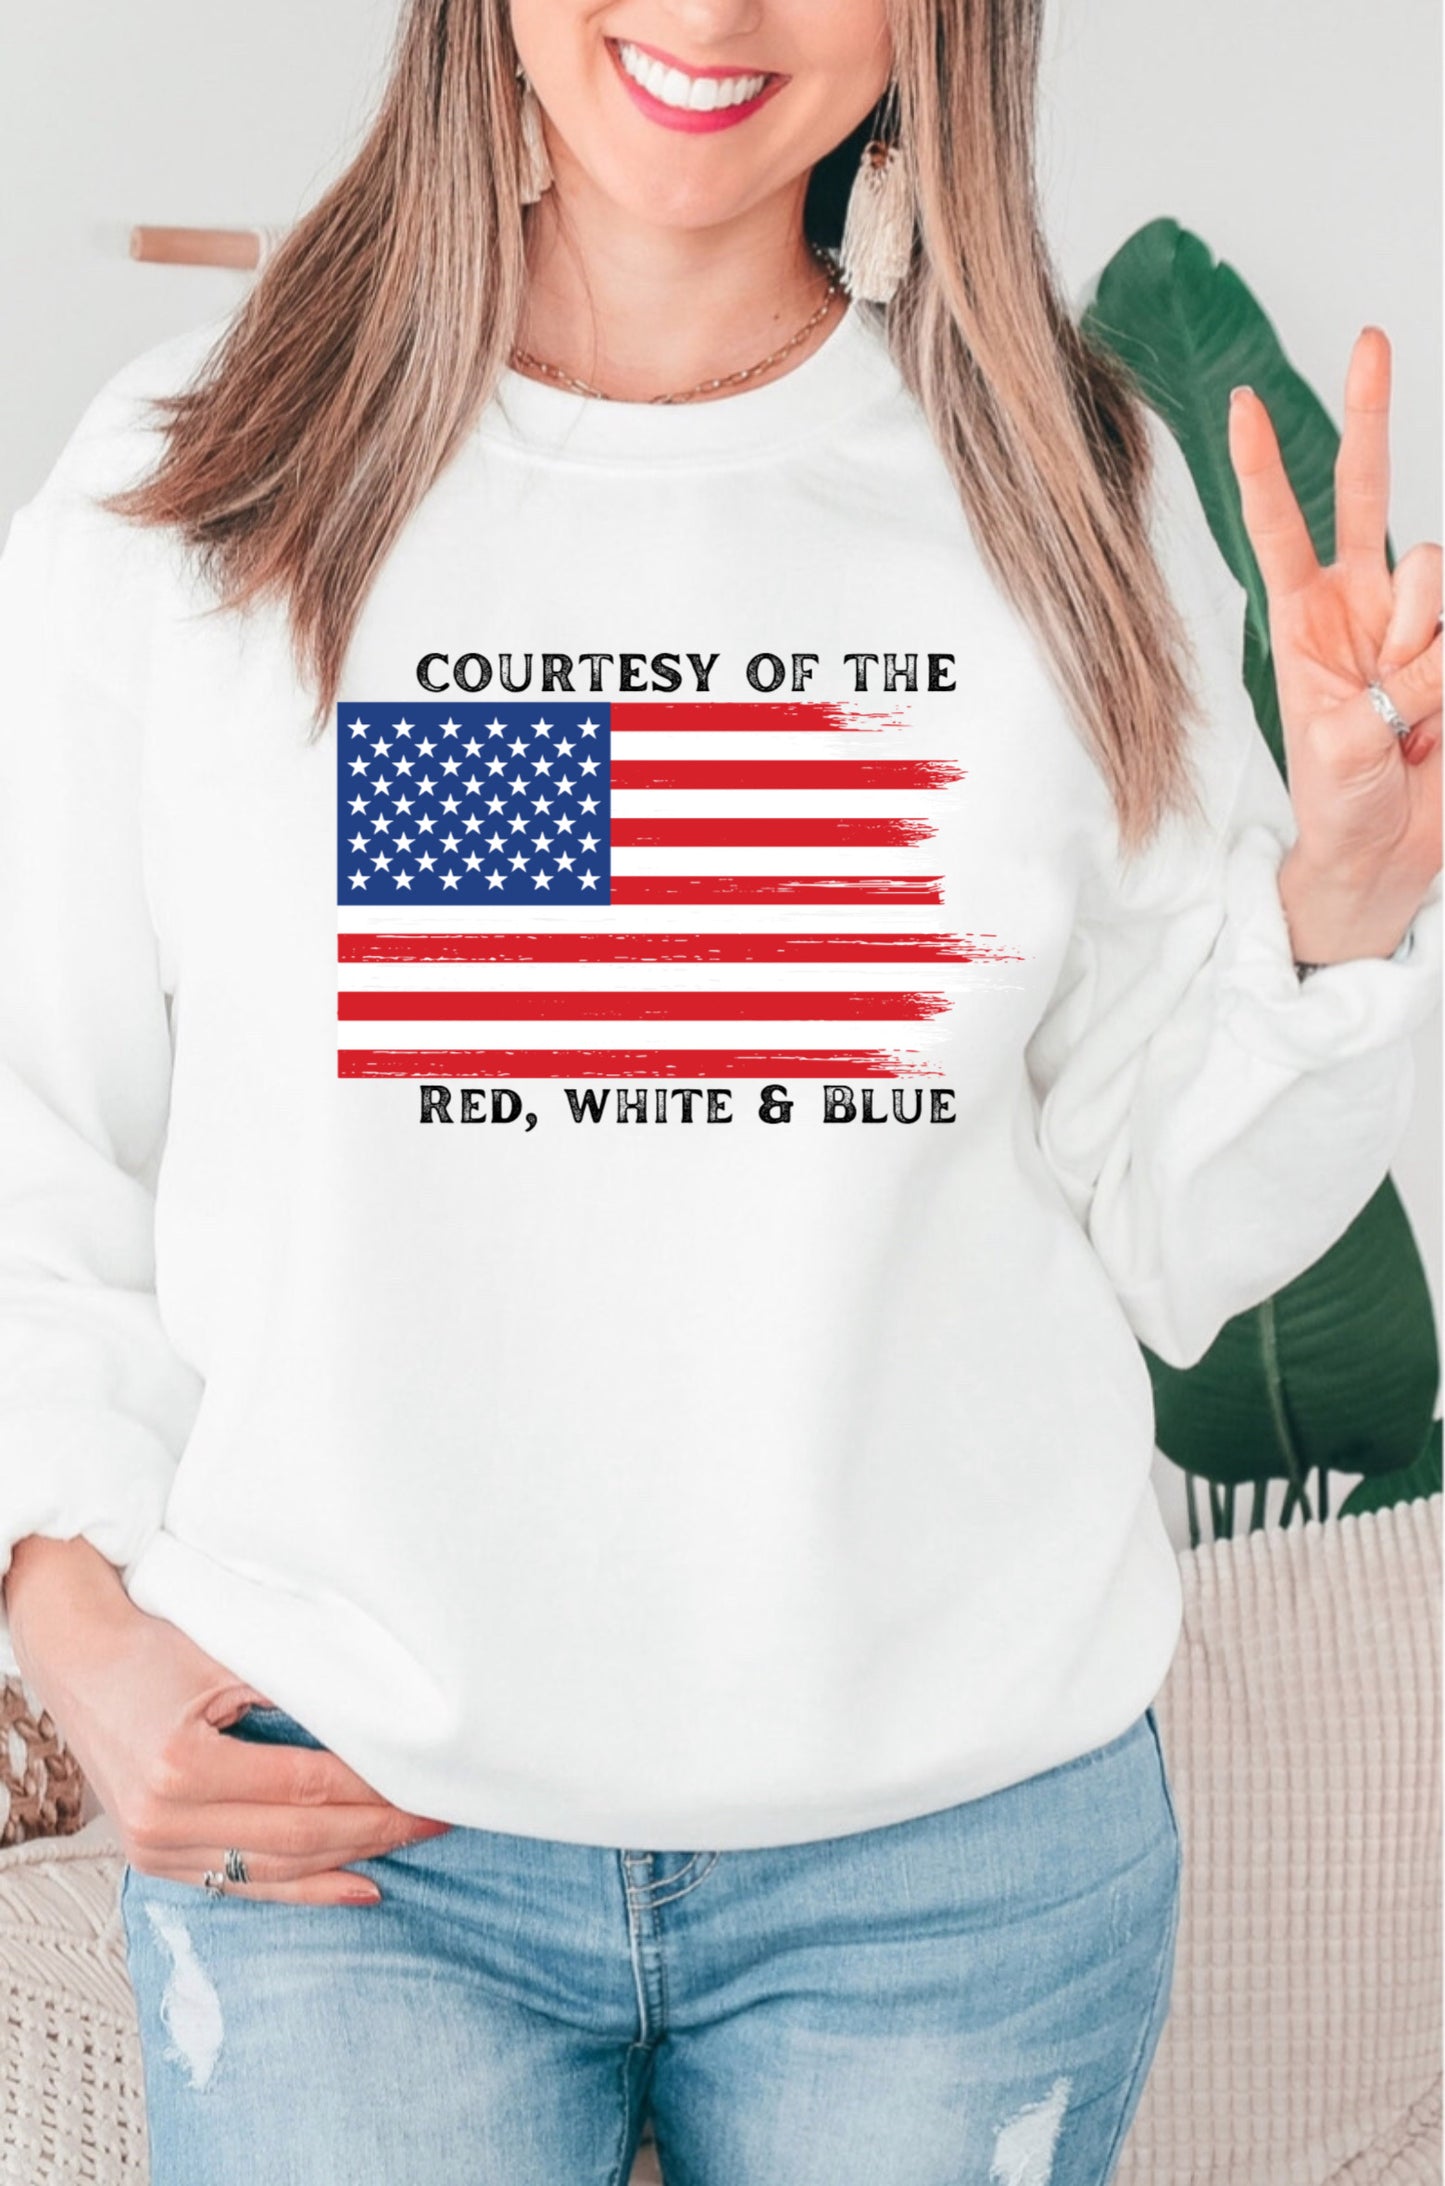 Courtesy of the Red, White and Blue Top